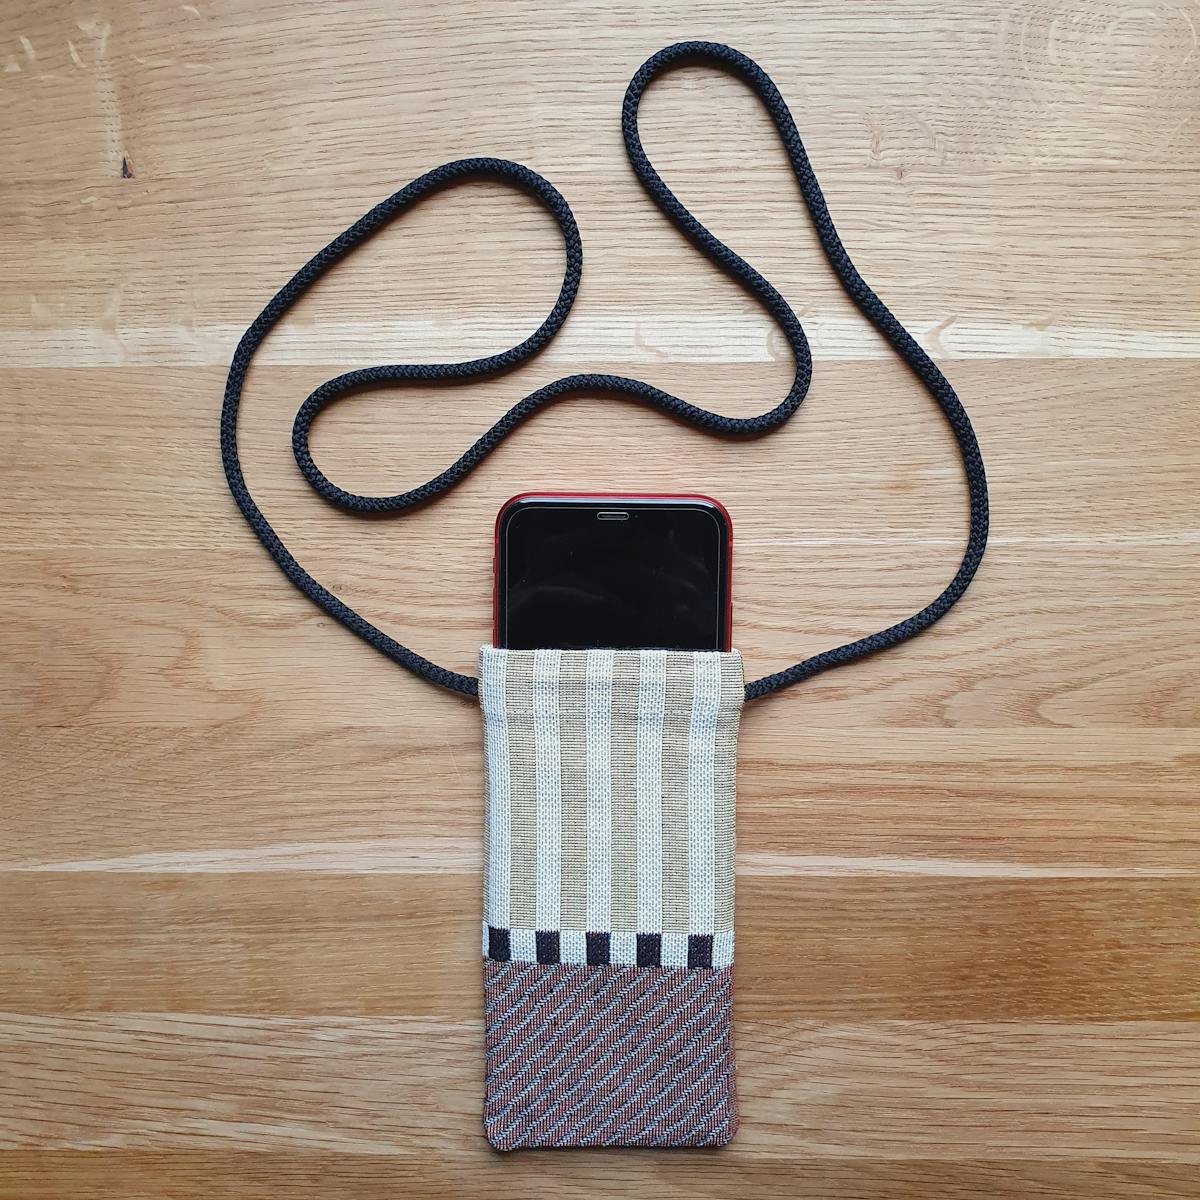  homemade iPhone Sleeve in woven striped fabric with neck cord and phone inside